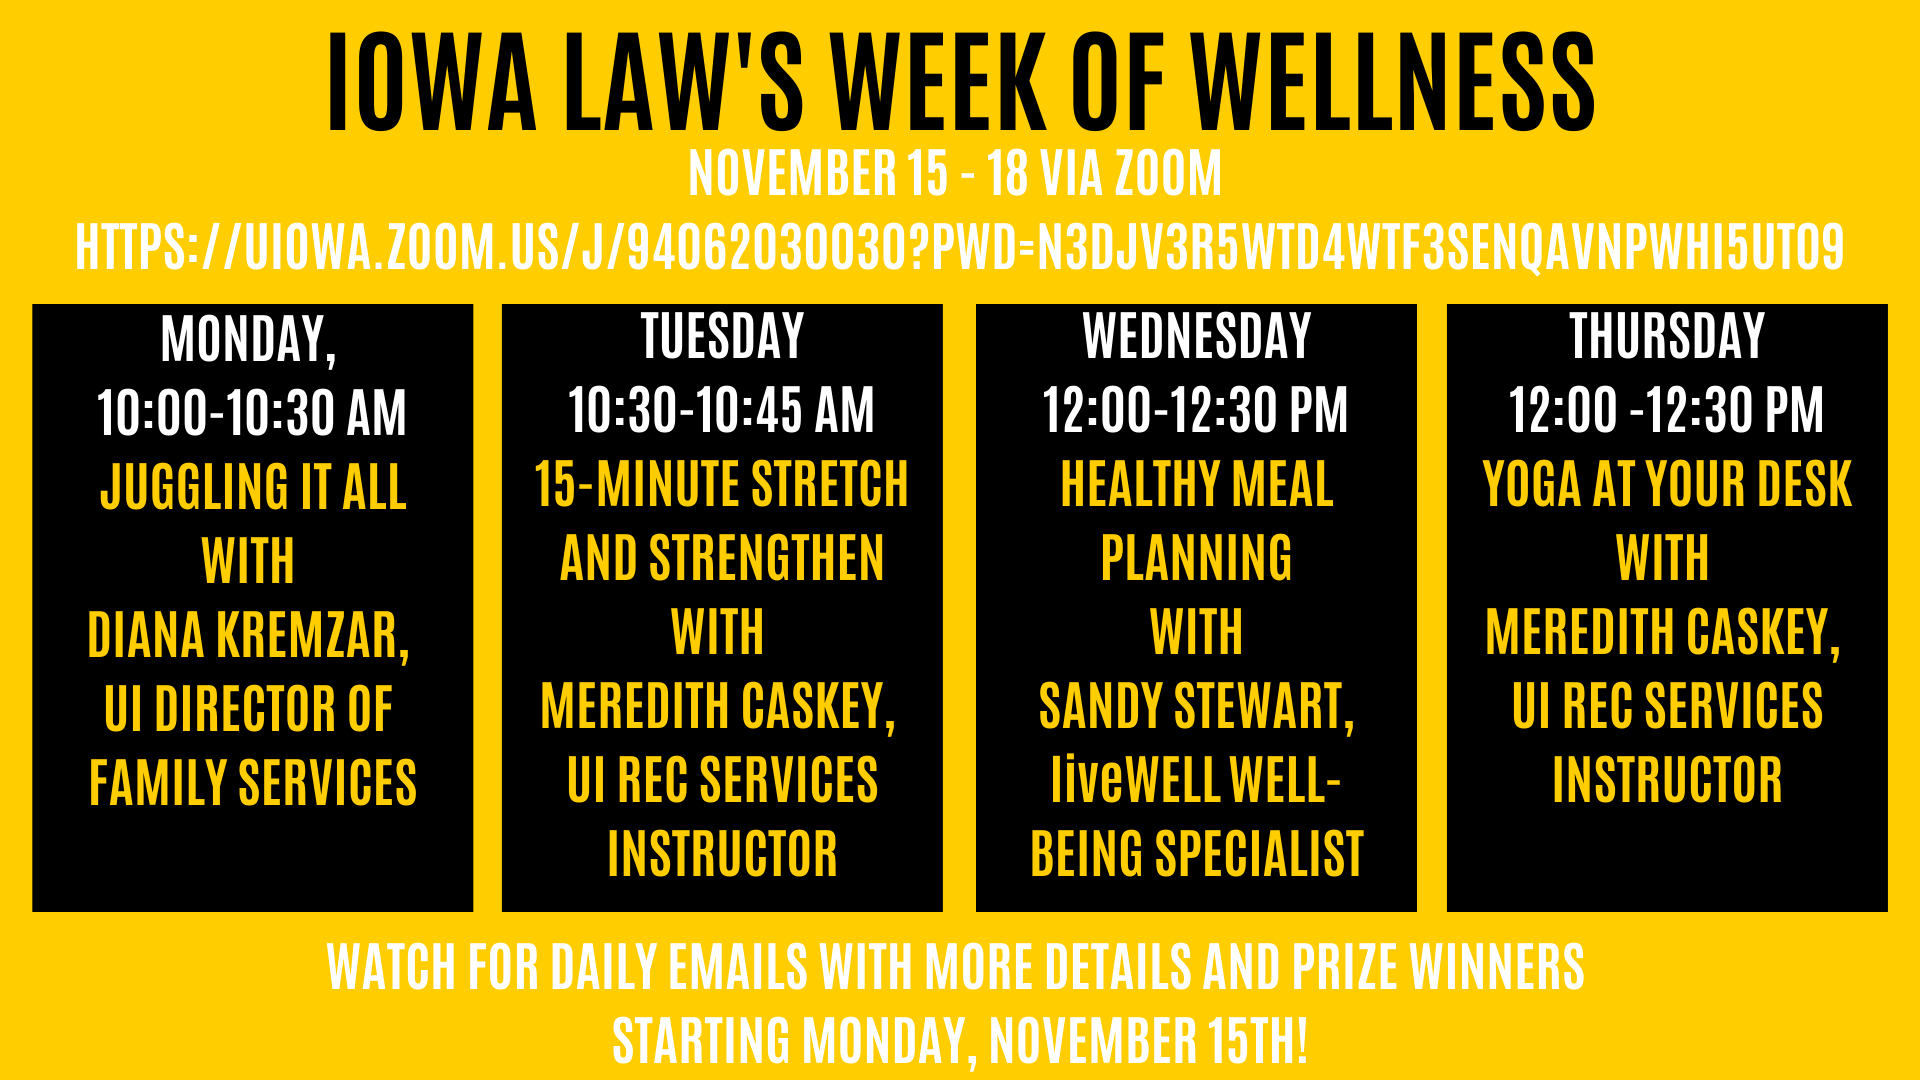  We’re excited to invite you to participate in our upcoming College of Law Week of Wellness. Please take this opportunity to invest in your well-being, learn about your wellness benefits, be active, and connect with others. We’ve arranged some fun educational and activity sessions that you can join via ZOOM.        Watch for daily emails with more details and prize winners starting Monday, November 15.         Week of Wellness Events via ZOOM        • Kick Off Event—Monday, November 15, 10:00-10:30 am     Juggling it All—Diana Kremzar, UI Director of Family Services    • Tuesday, November 16 , 10:30-10:45 am     15-Minute Stretch & Strengthen—Meredith Caskey, UI Rec Services Instructor    • Wednesday, November 17, 12:00-12:30 pm     Healthy Meal Planning—Sandy Stewart, UI liveWELL Well-Being Specialist    • Thursday, November 18, 12:00-12:30 pm     Yoga at Your Desk—Meredith Caskey, UI Rec Services Instructor